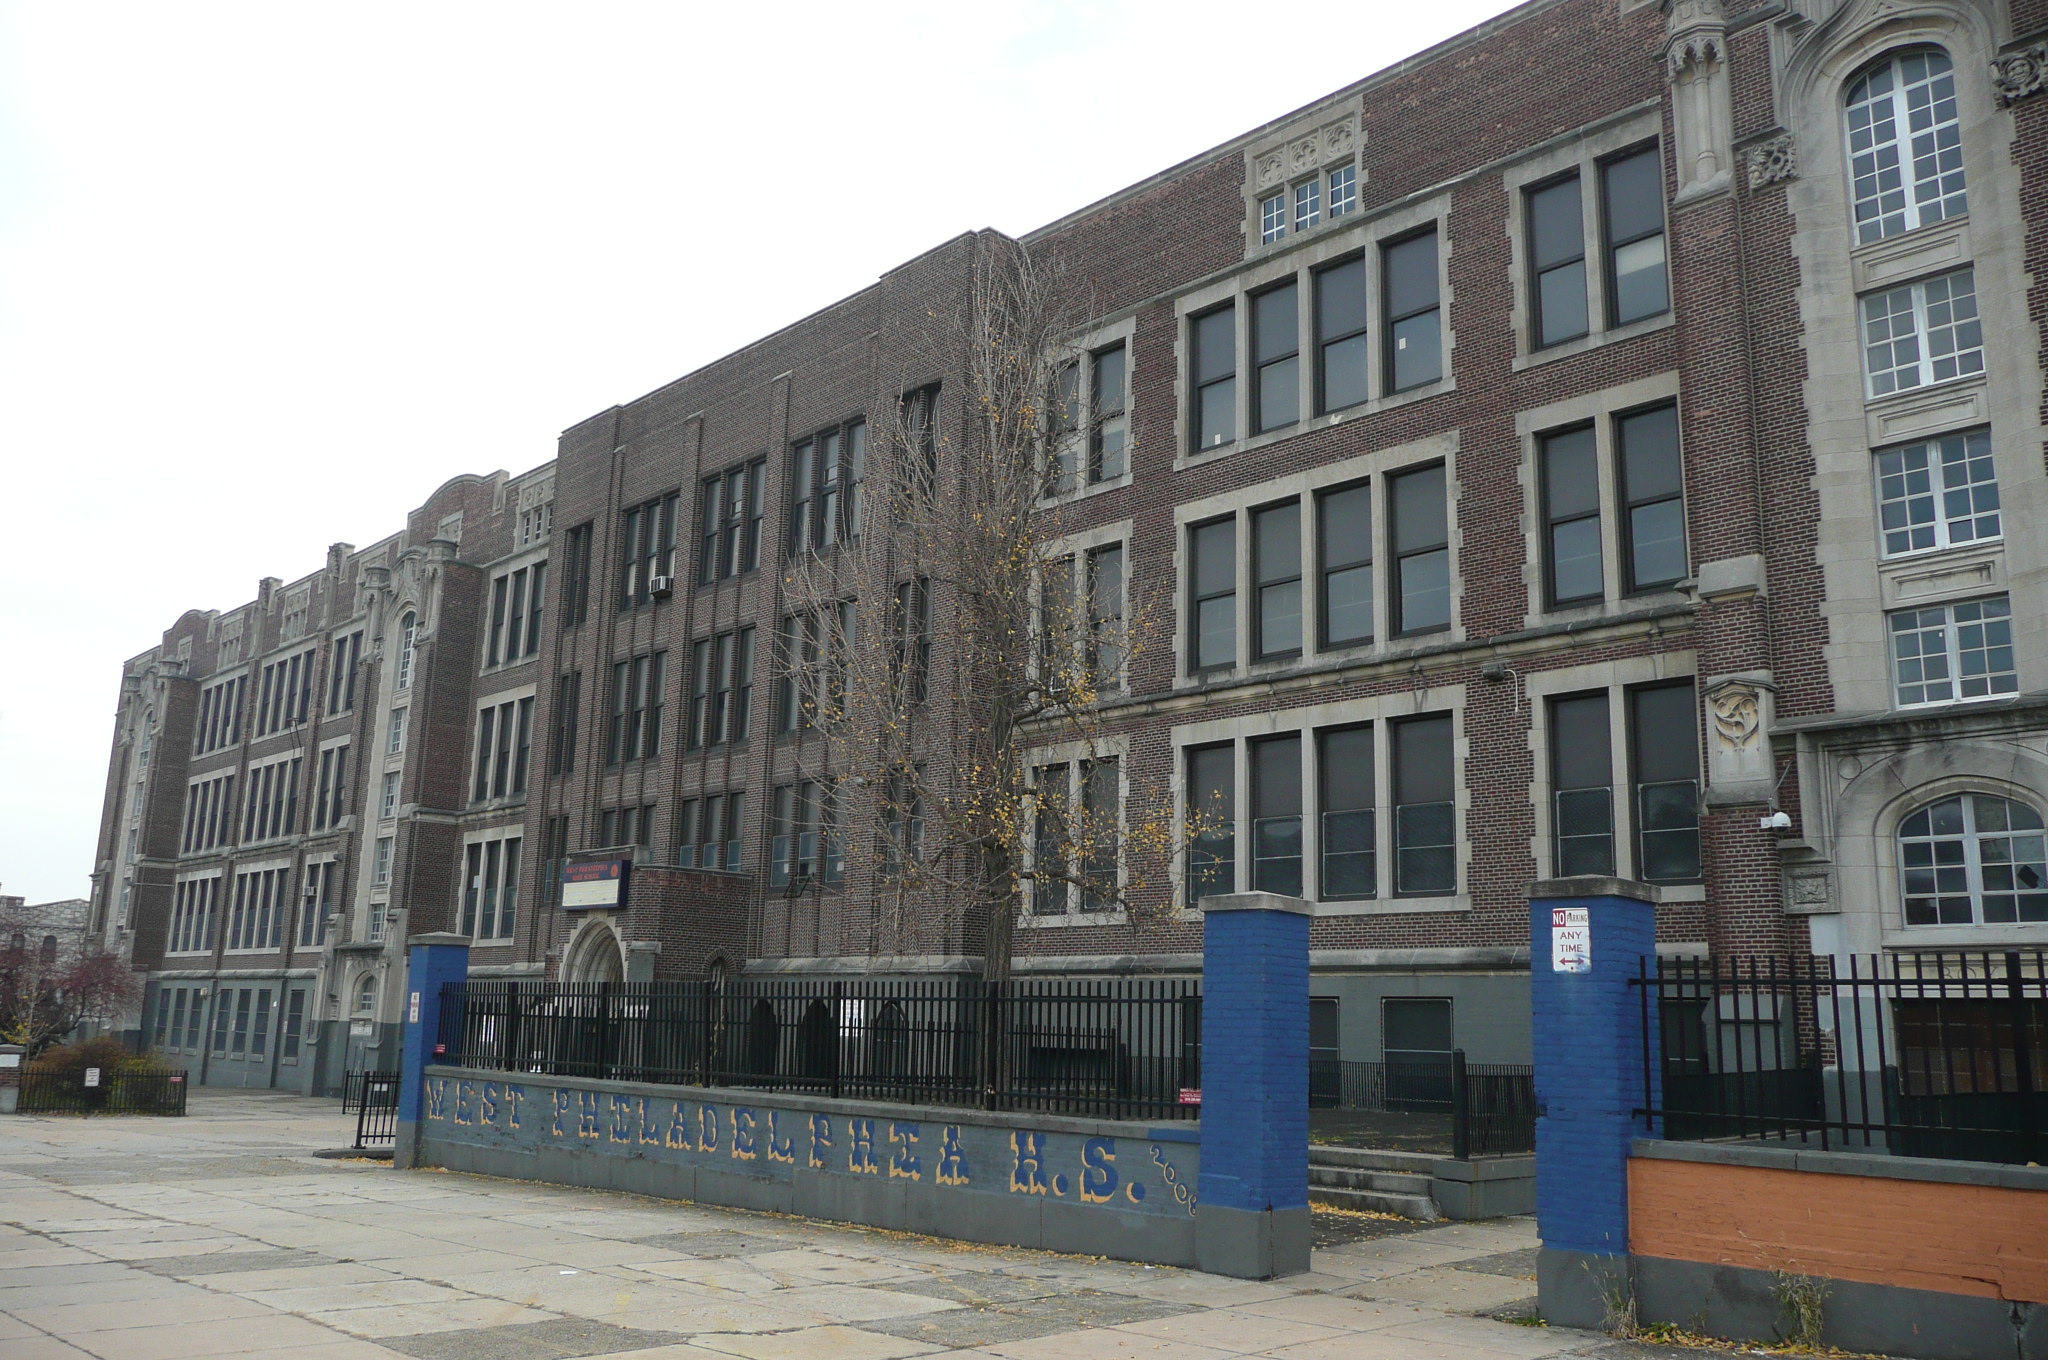 The old West Philadelphia High School was just approved for sale to be converted into loft apartments.